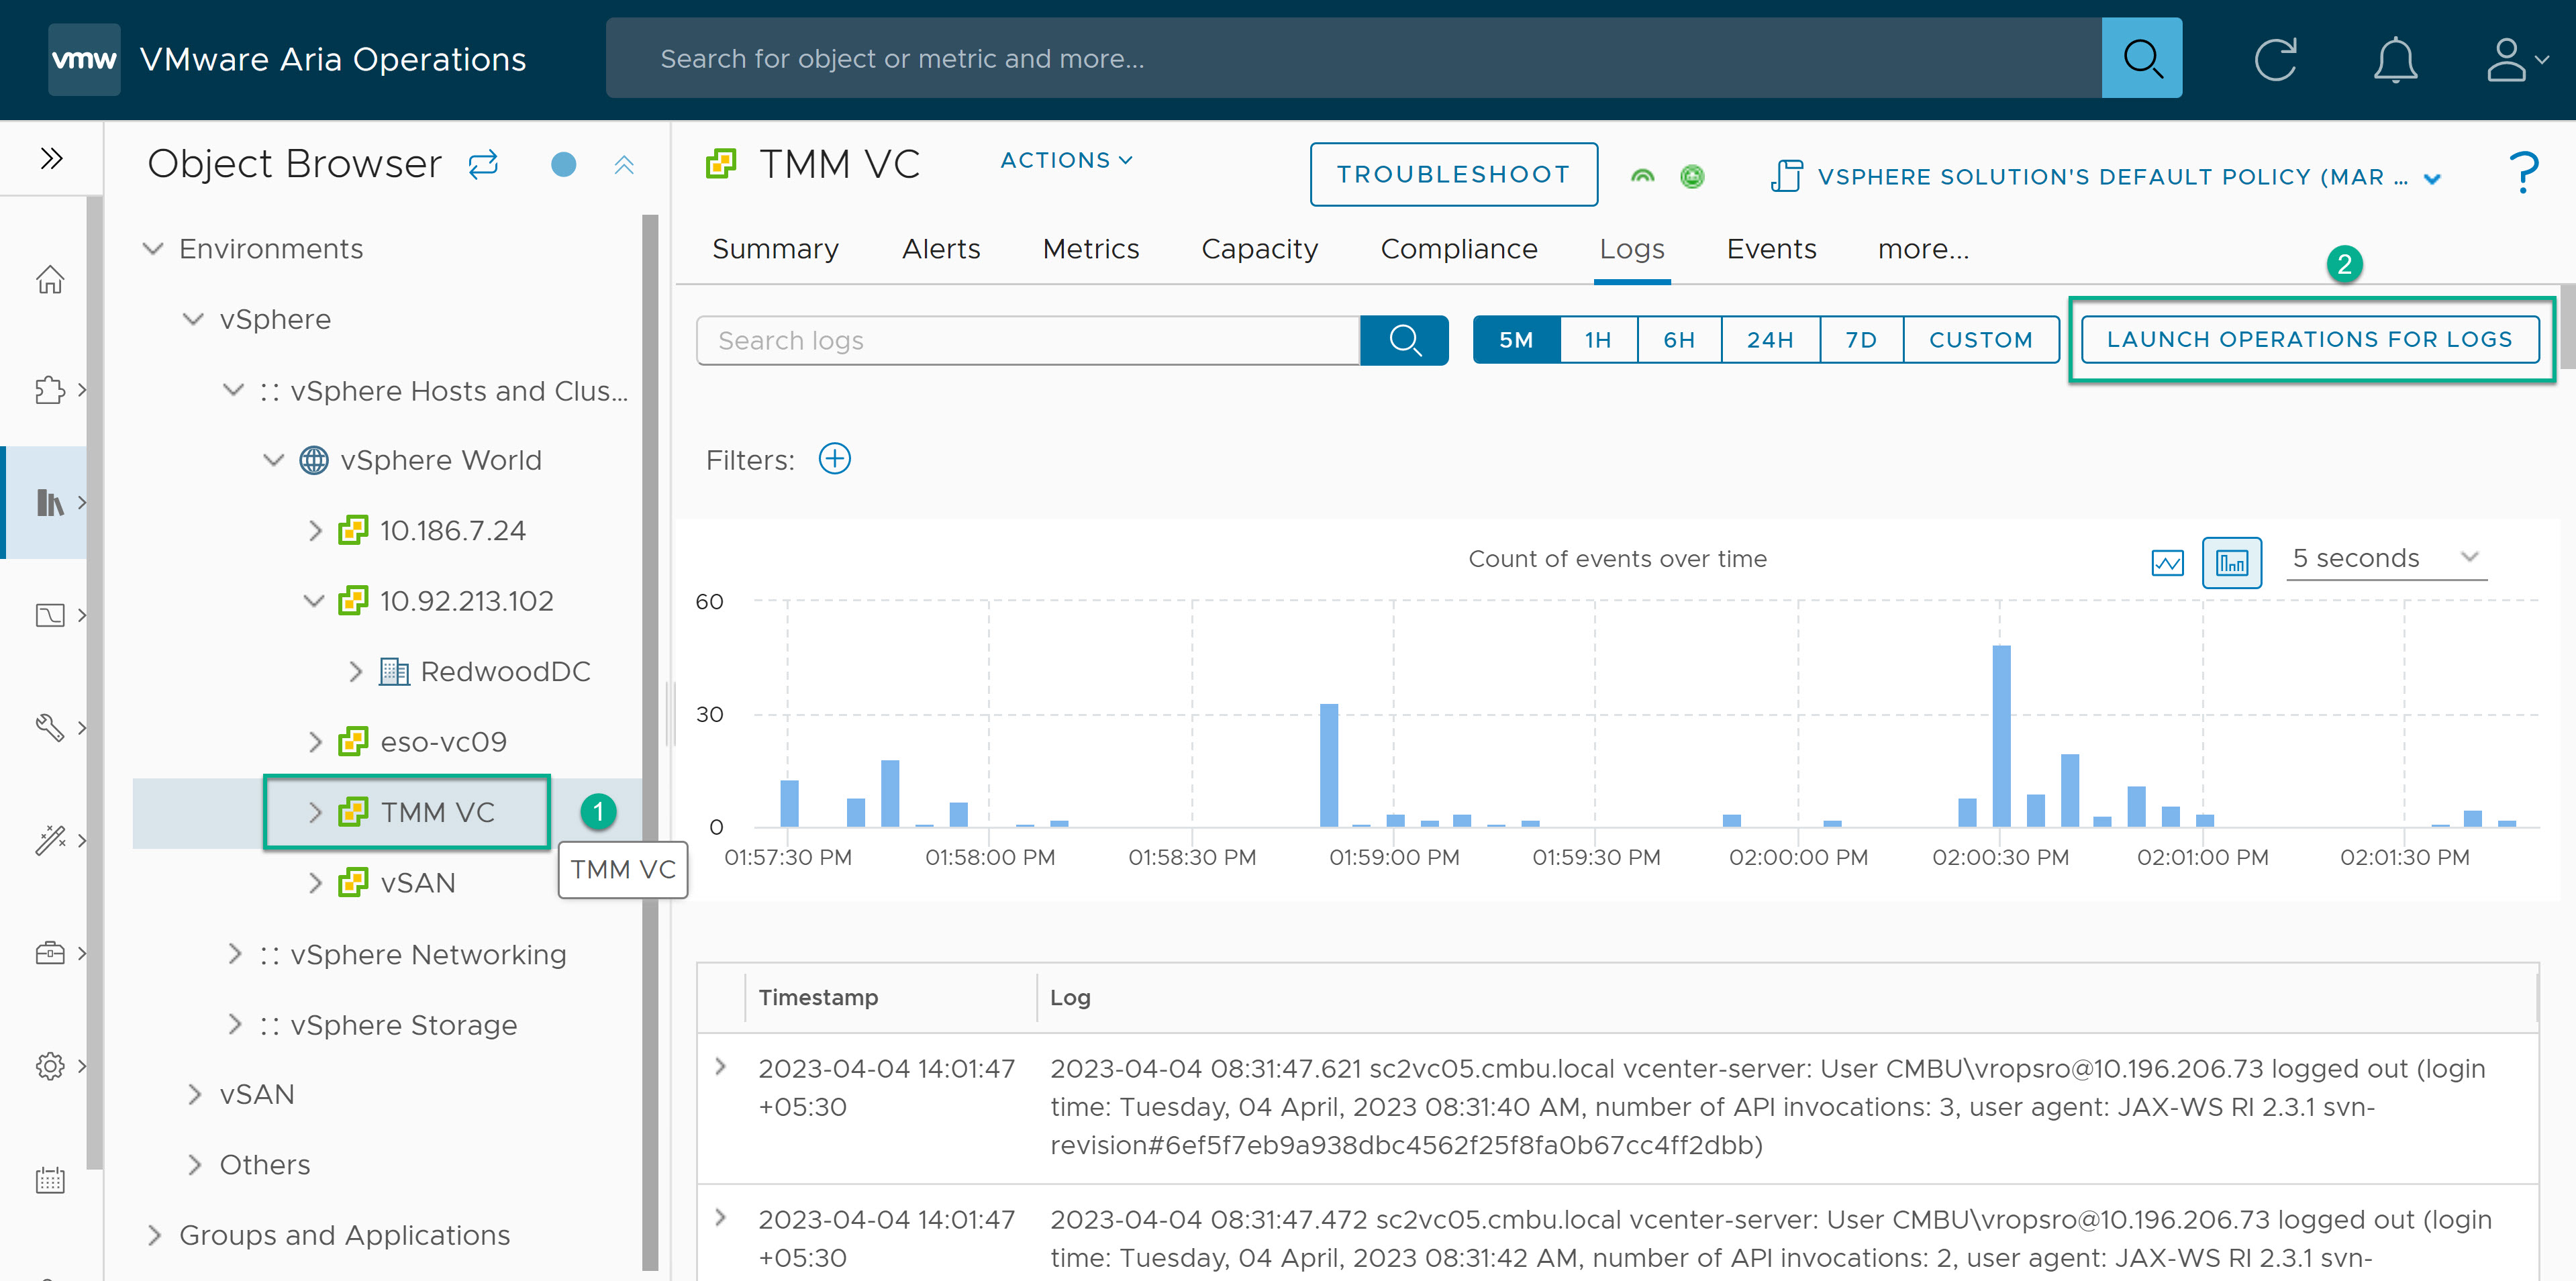 The launch in context option to find log events for the selected object on VMware Aria Operations for Logs